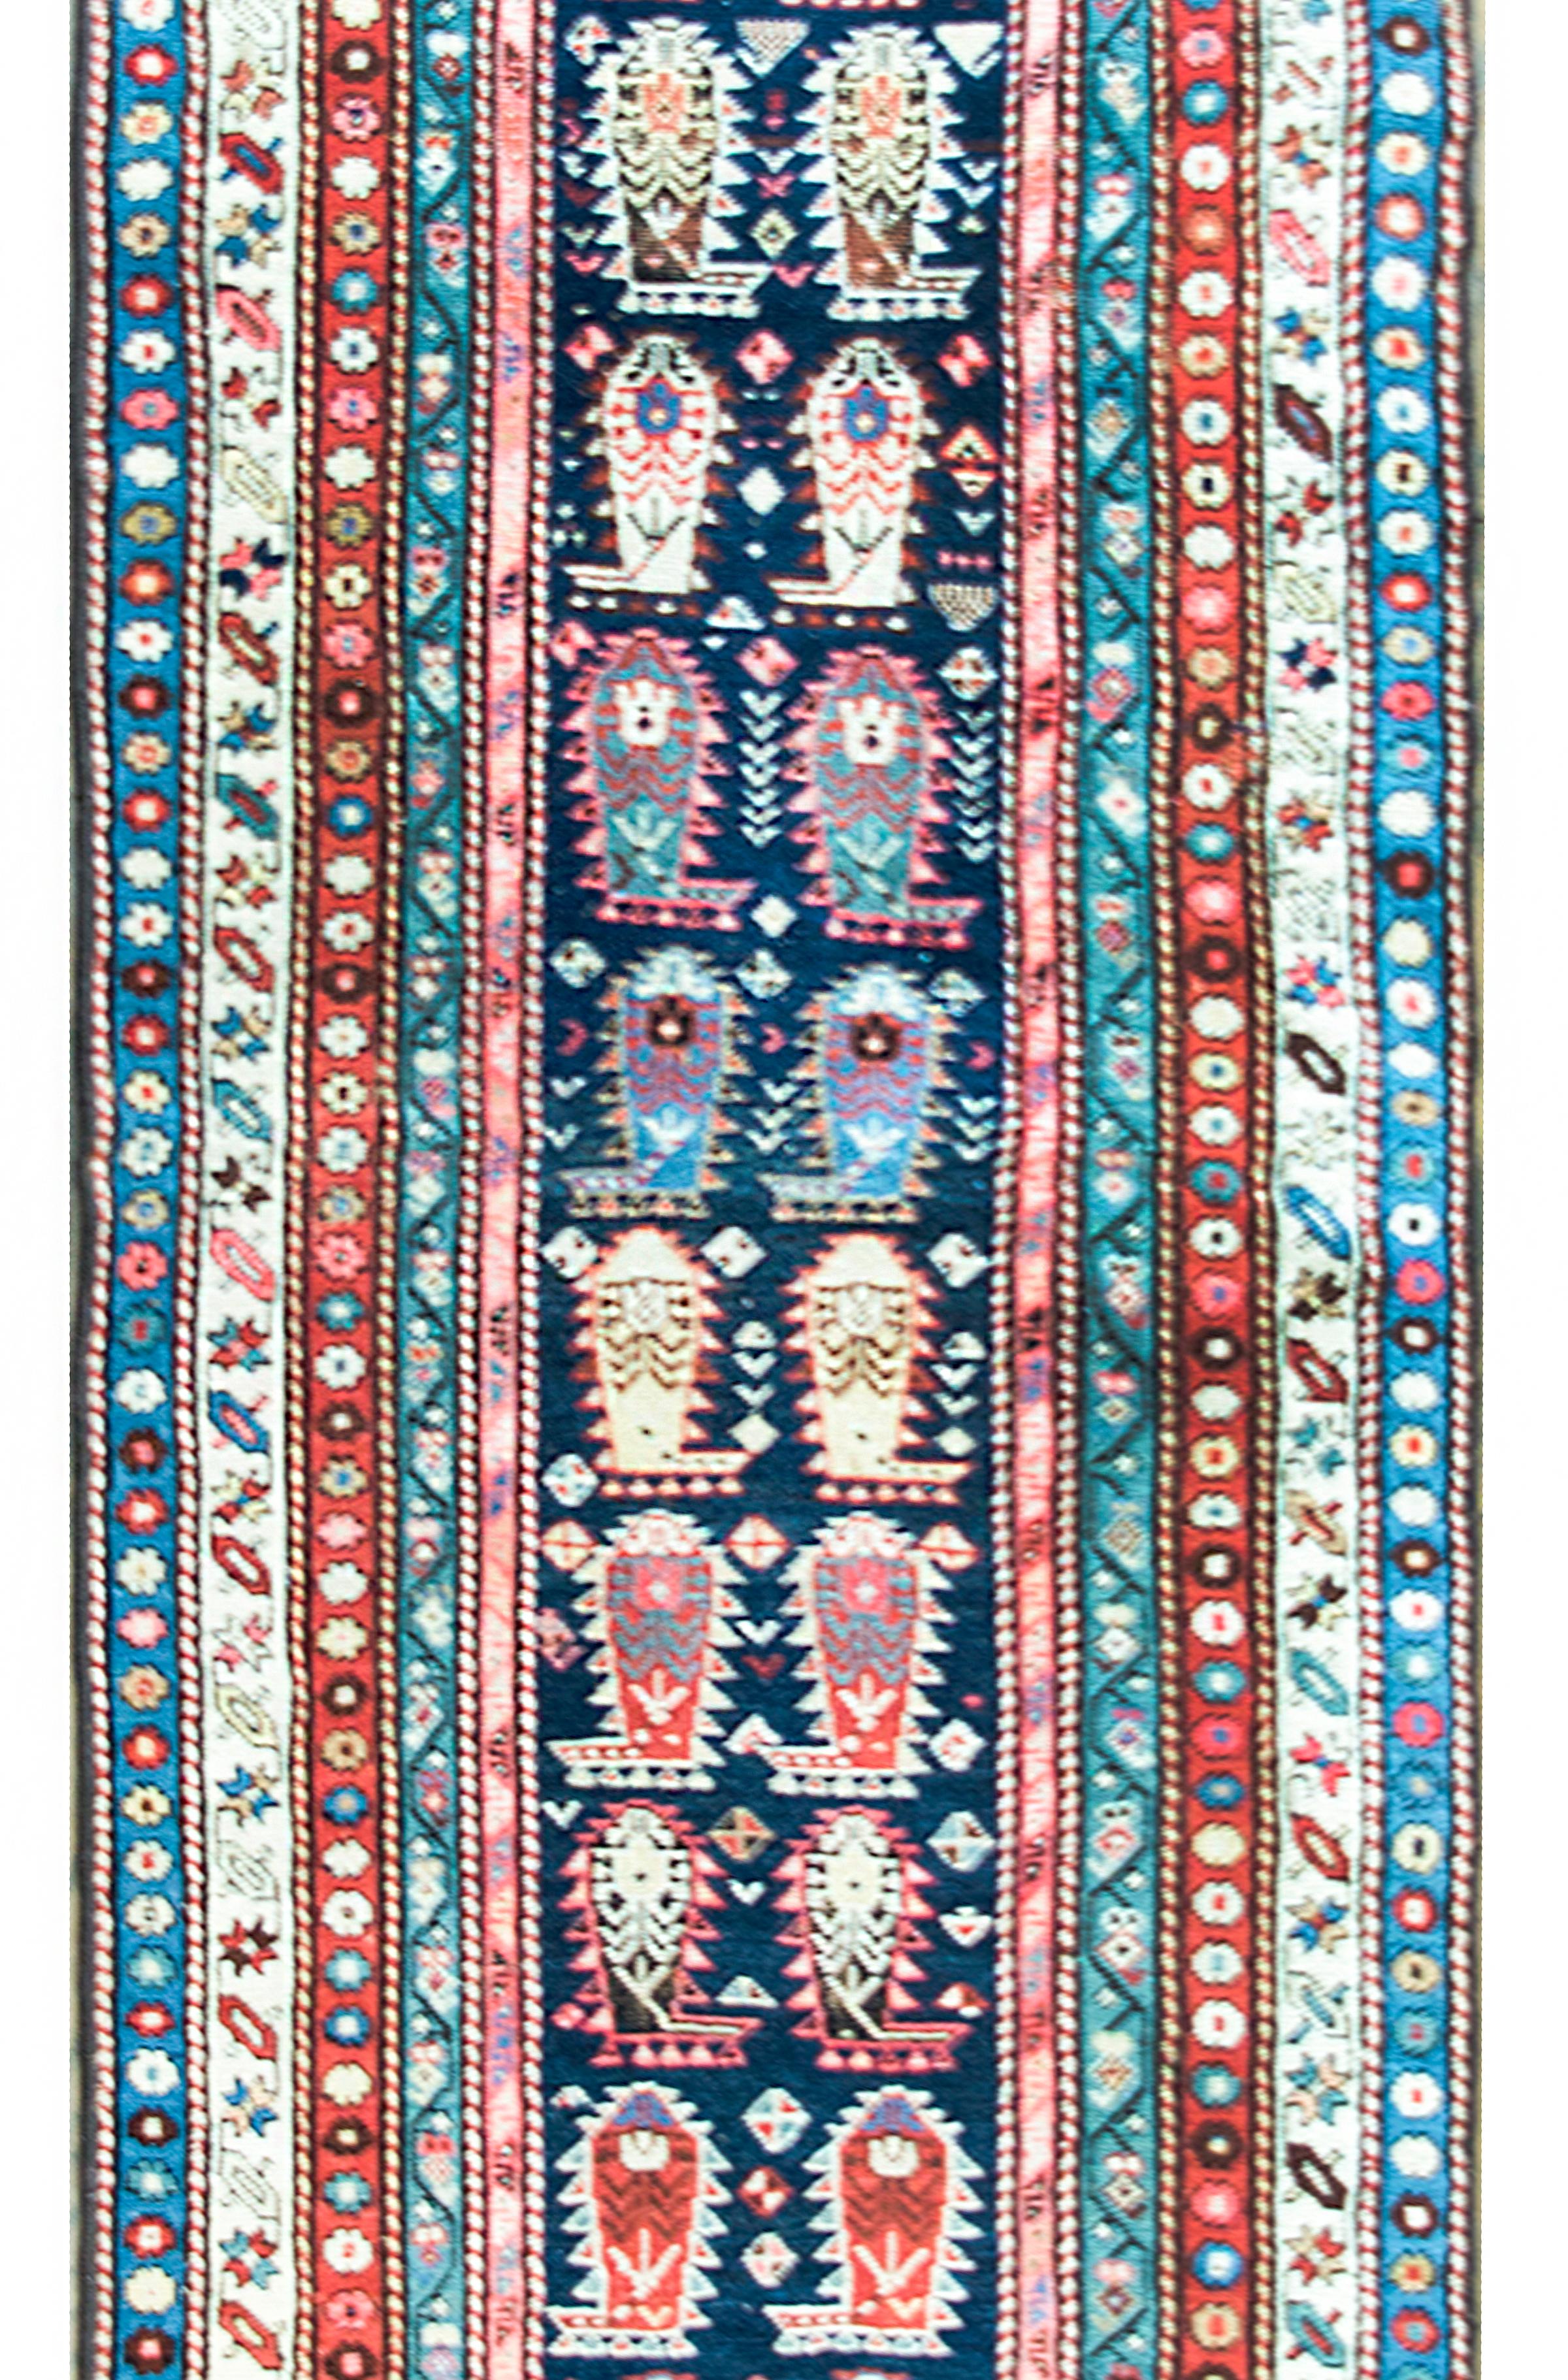 A stunning early 20th century Persian Ganjeh runner with an all-over repeated paisley pattern surrounded by a wide border with multiple petite floral patterned stripes, and all woven in bright cimrsons, indigos, golds, pinks, and cream colored wools.